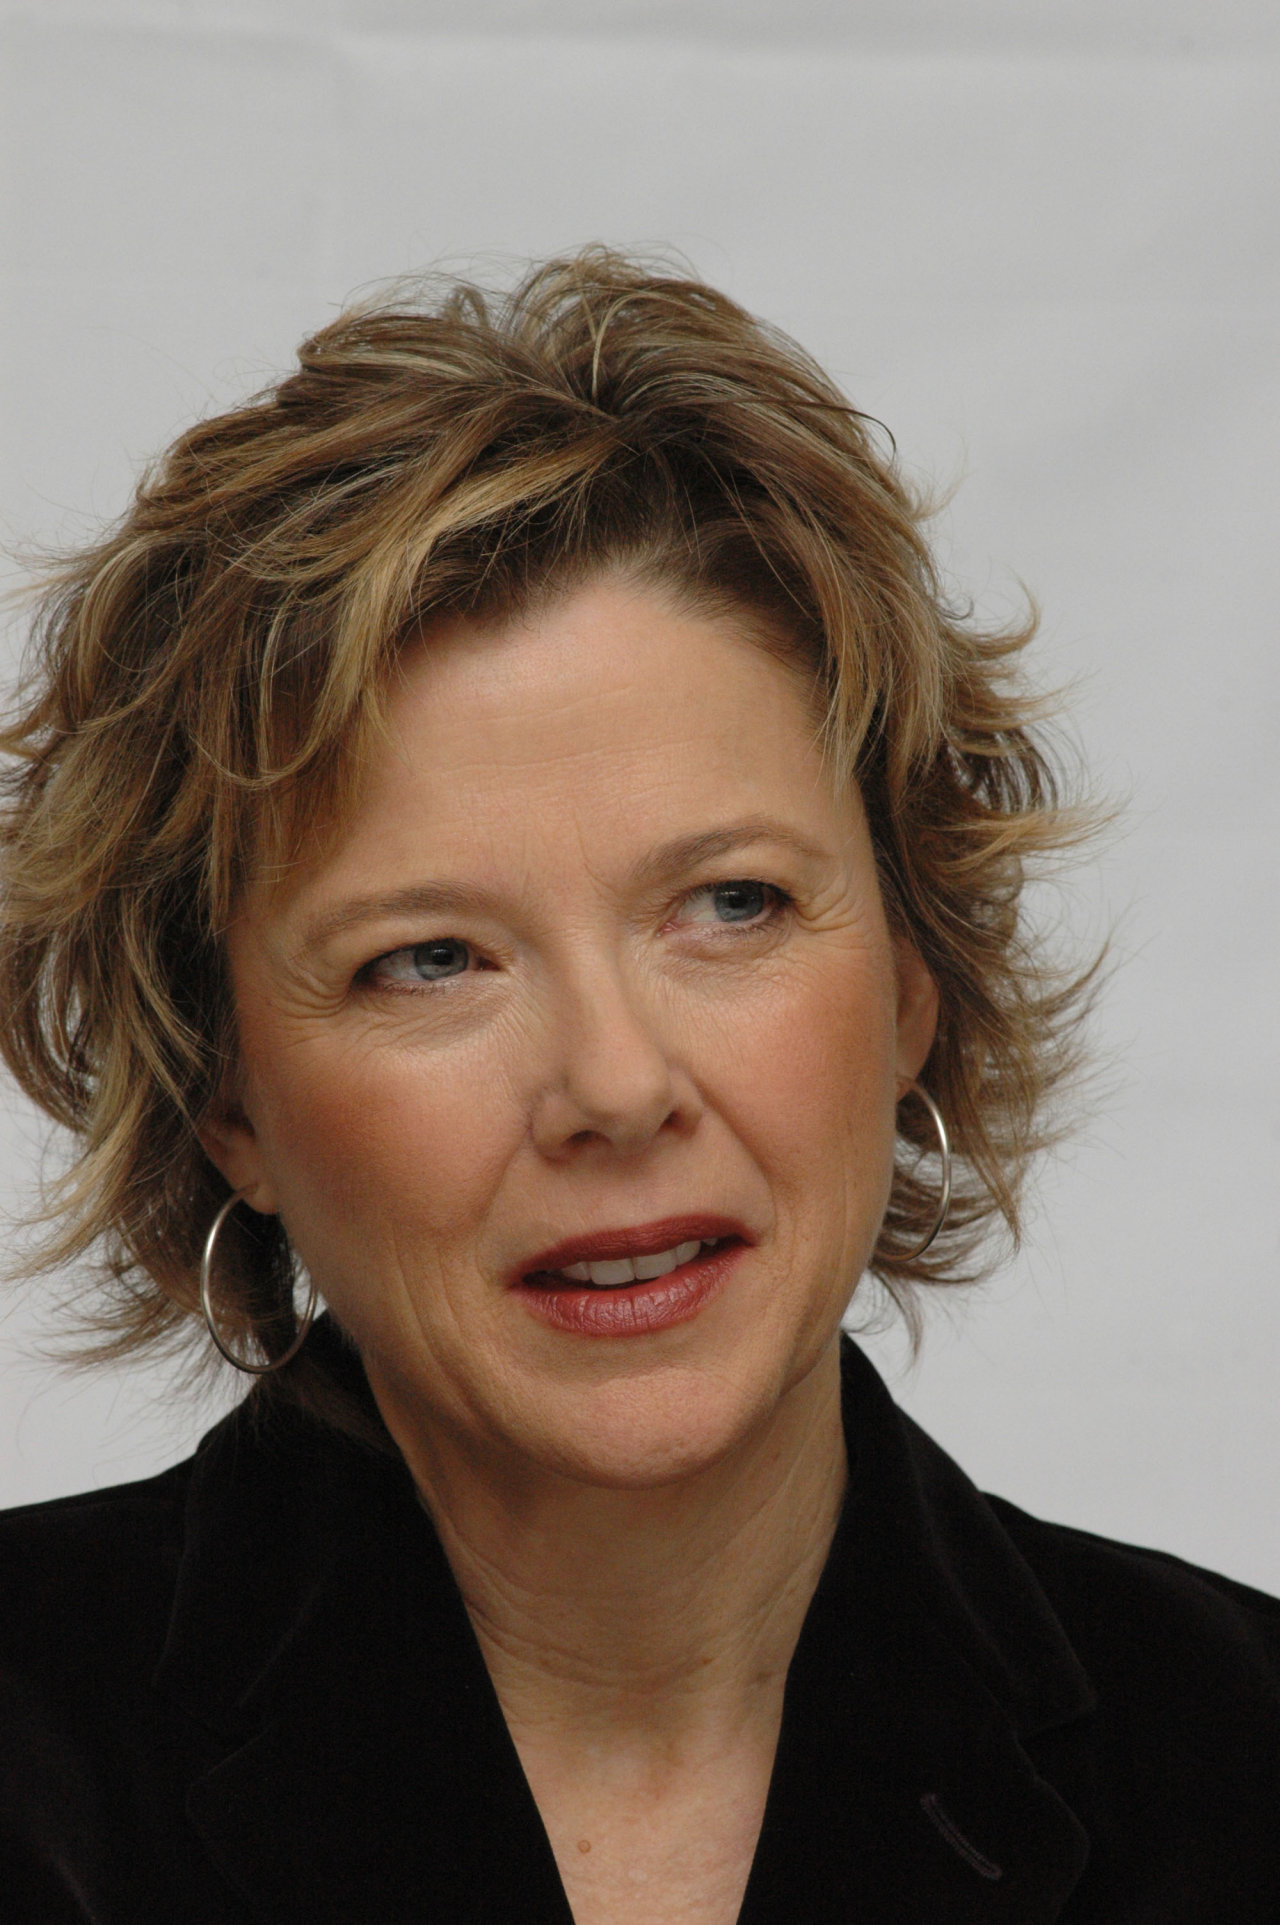 More Pictures Of Annette Bening. annette bening news. 